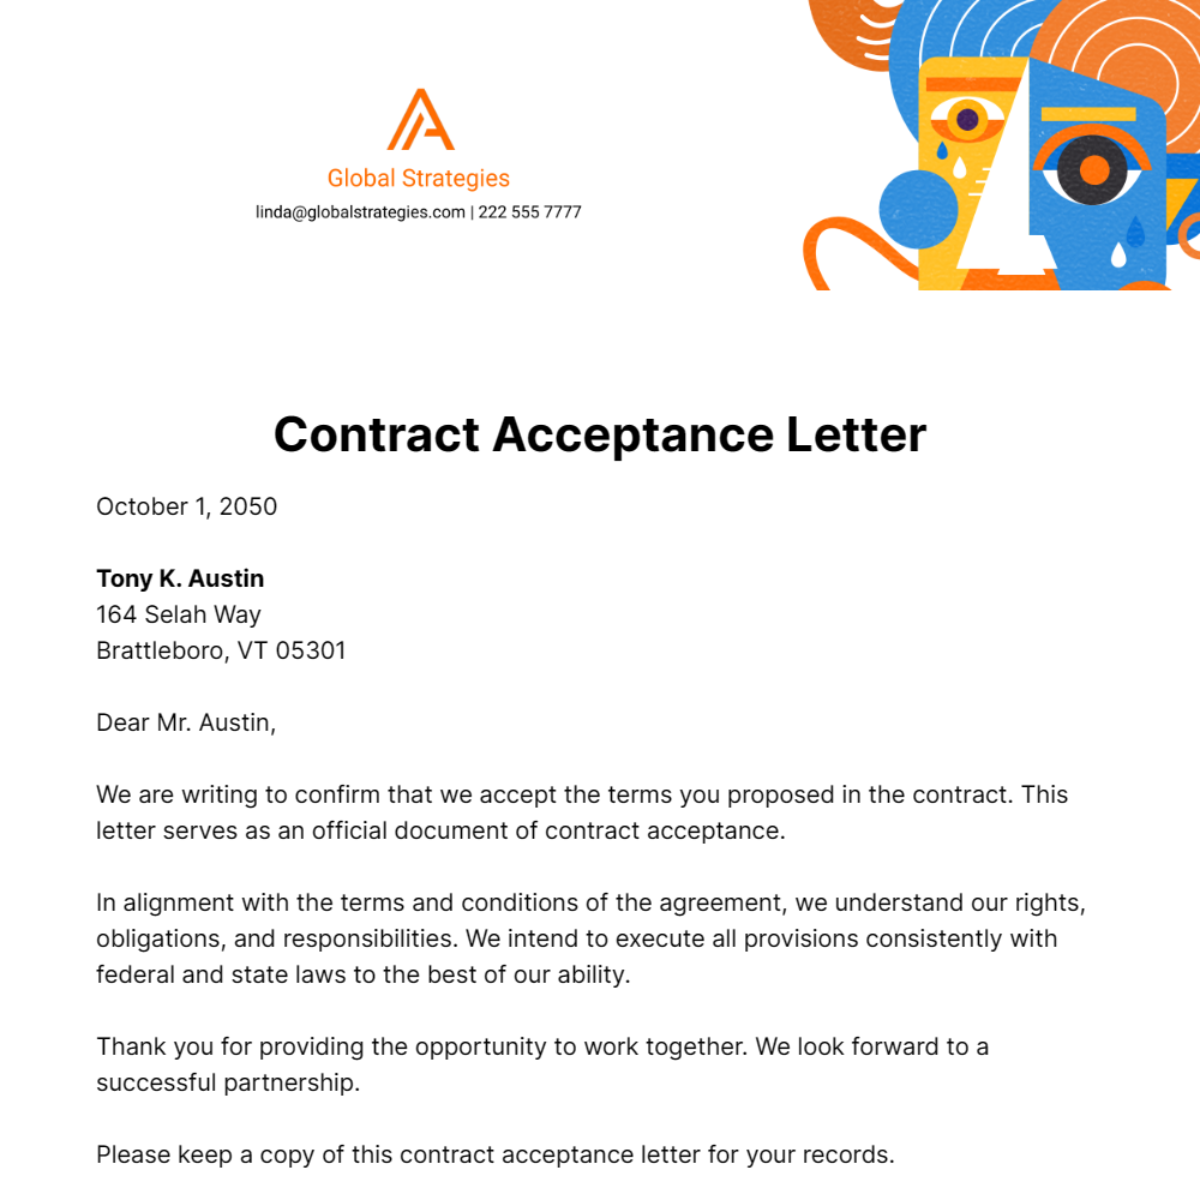 Contract Acceptance Letter Template